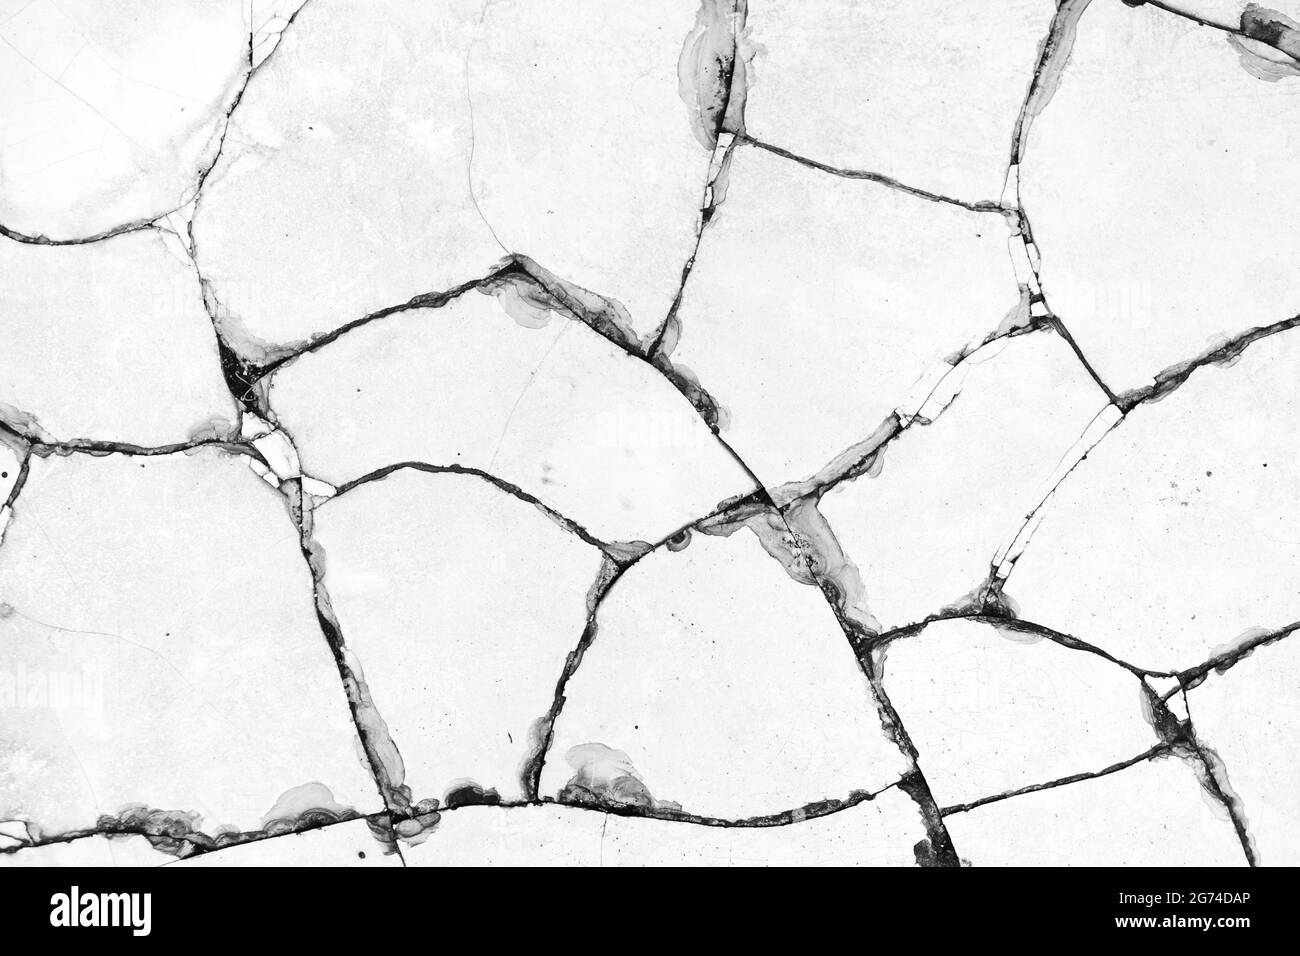 Cracking floor Black and White Stock Photos & Images - Alamy